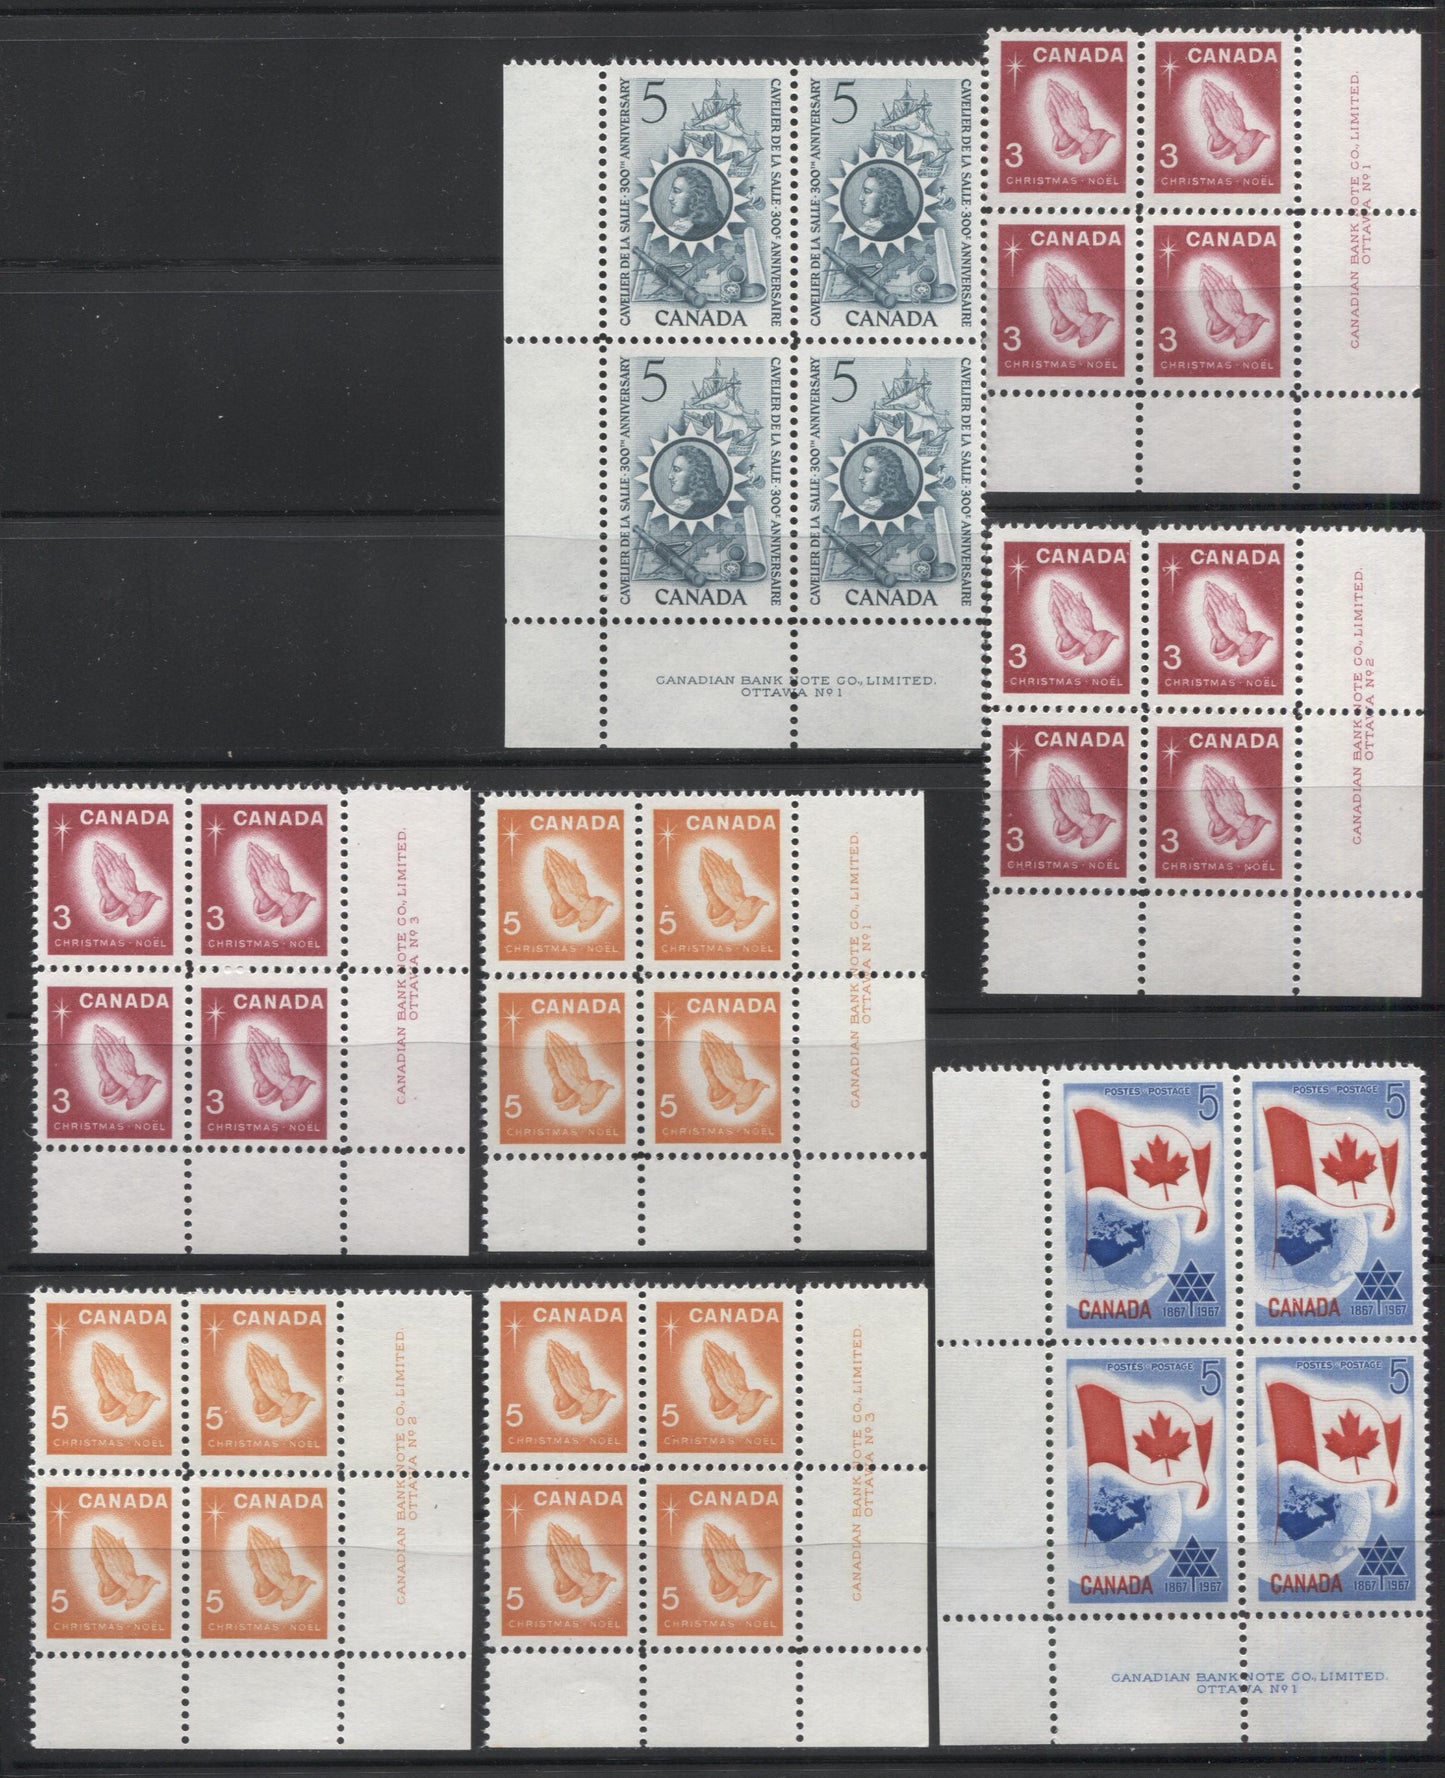 Lot 40 Canada #446-453 3c & 5c Blue Green - Blue And Red Cavelier de La Salle - Flag & Earth, 1966-1967 Commemoratives, 12 VFNH LR and LL Plates 1-3 Blocks Of 4, 452 and 447 are on Unlisted LF-fl Paper